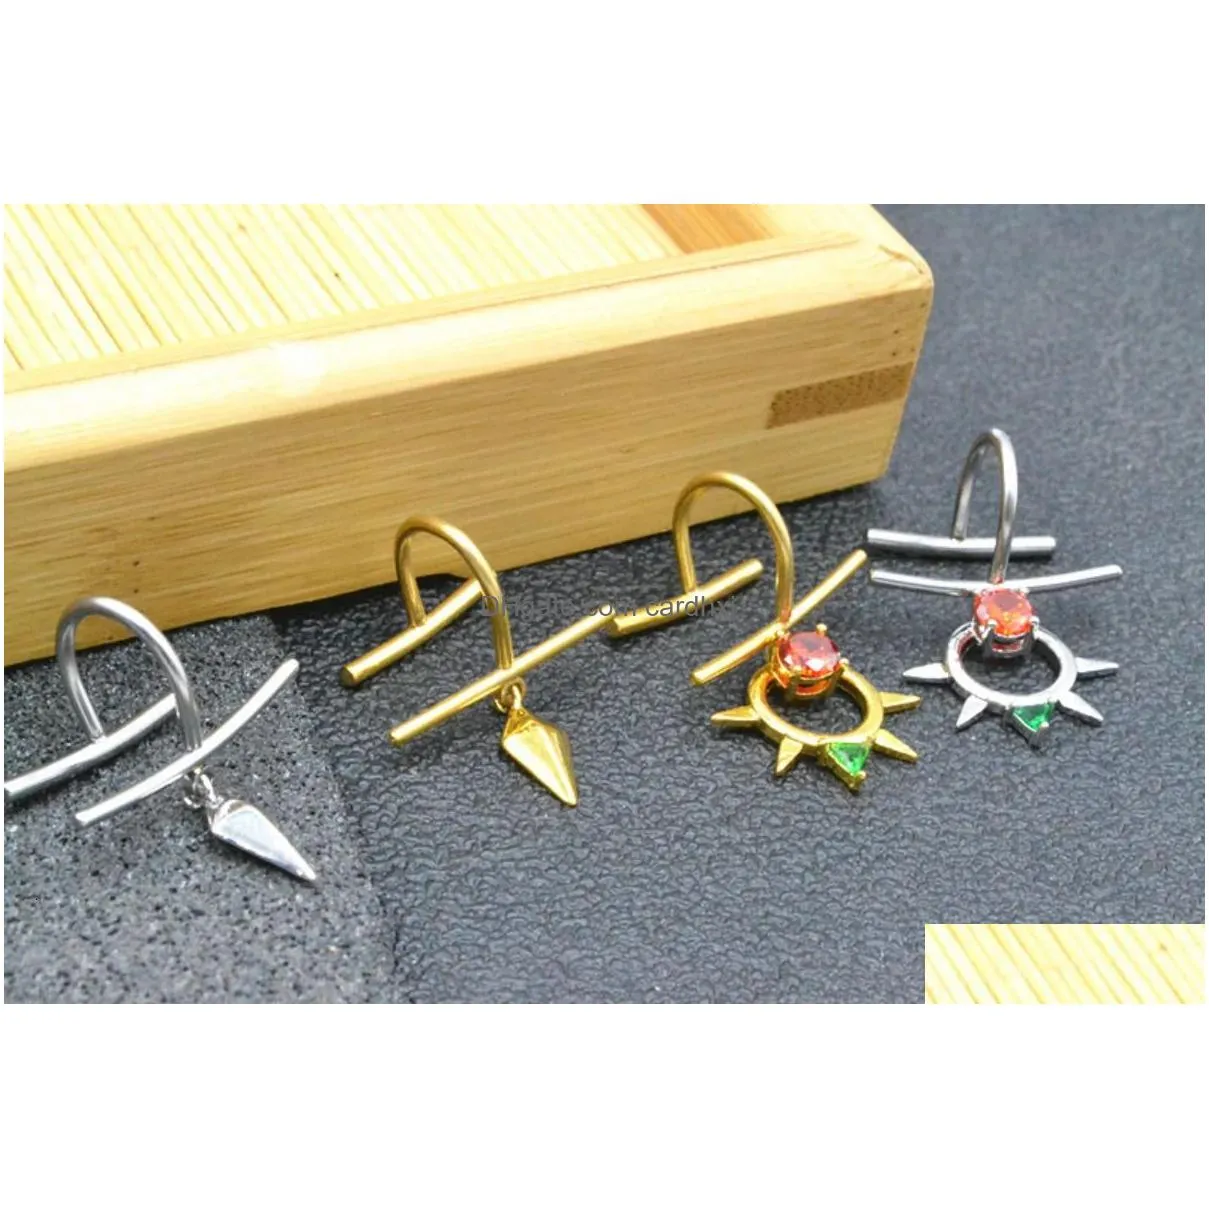 Nose Rings & Studs Fake Lip Piercing Jewelry None Labret Faux Lipring Stainless Steel Lead Nickel Body 231019 Drop Delivery Dhhqy